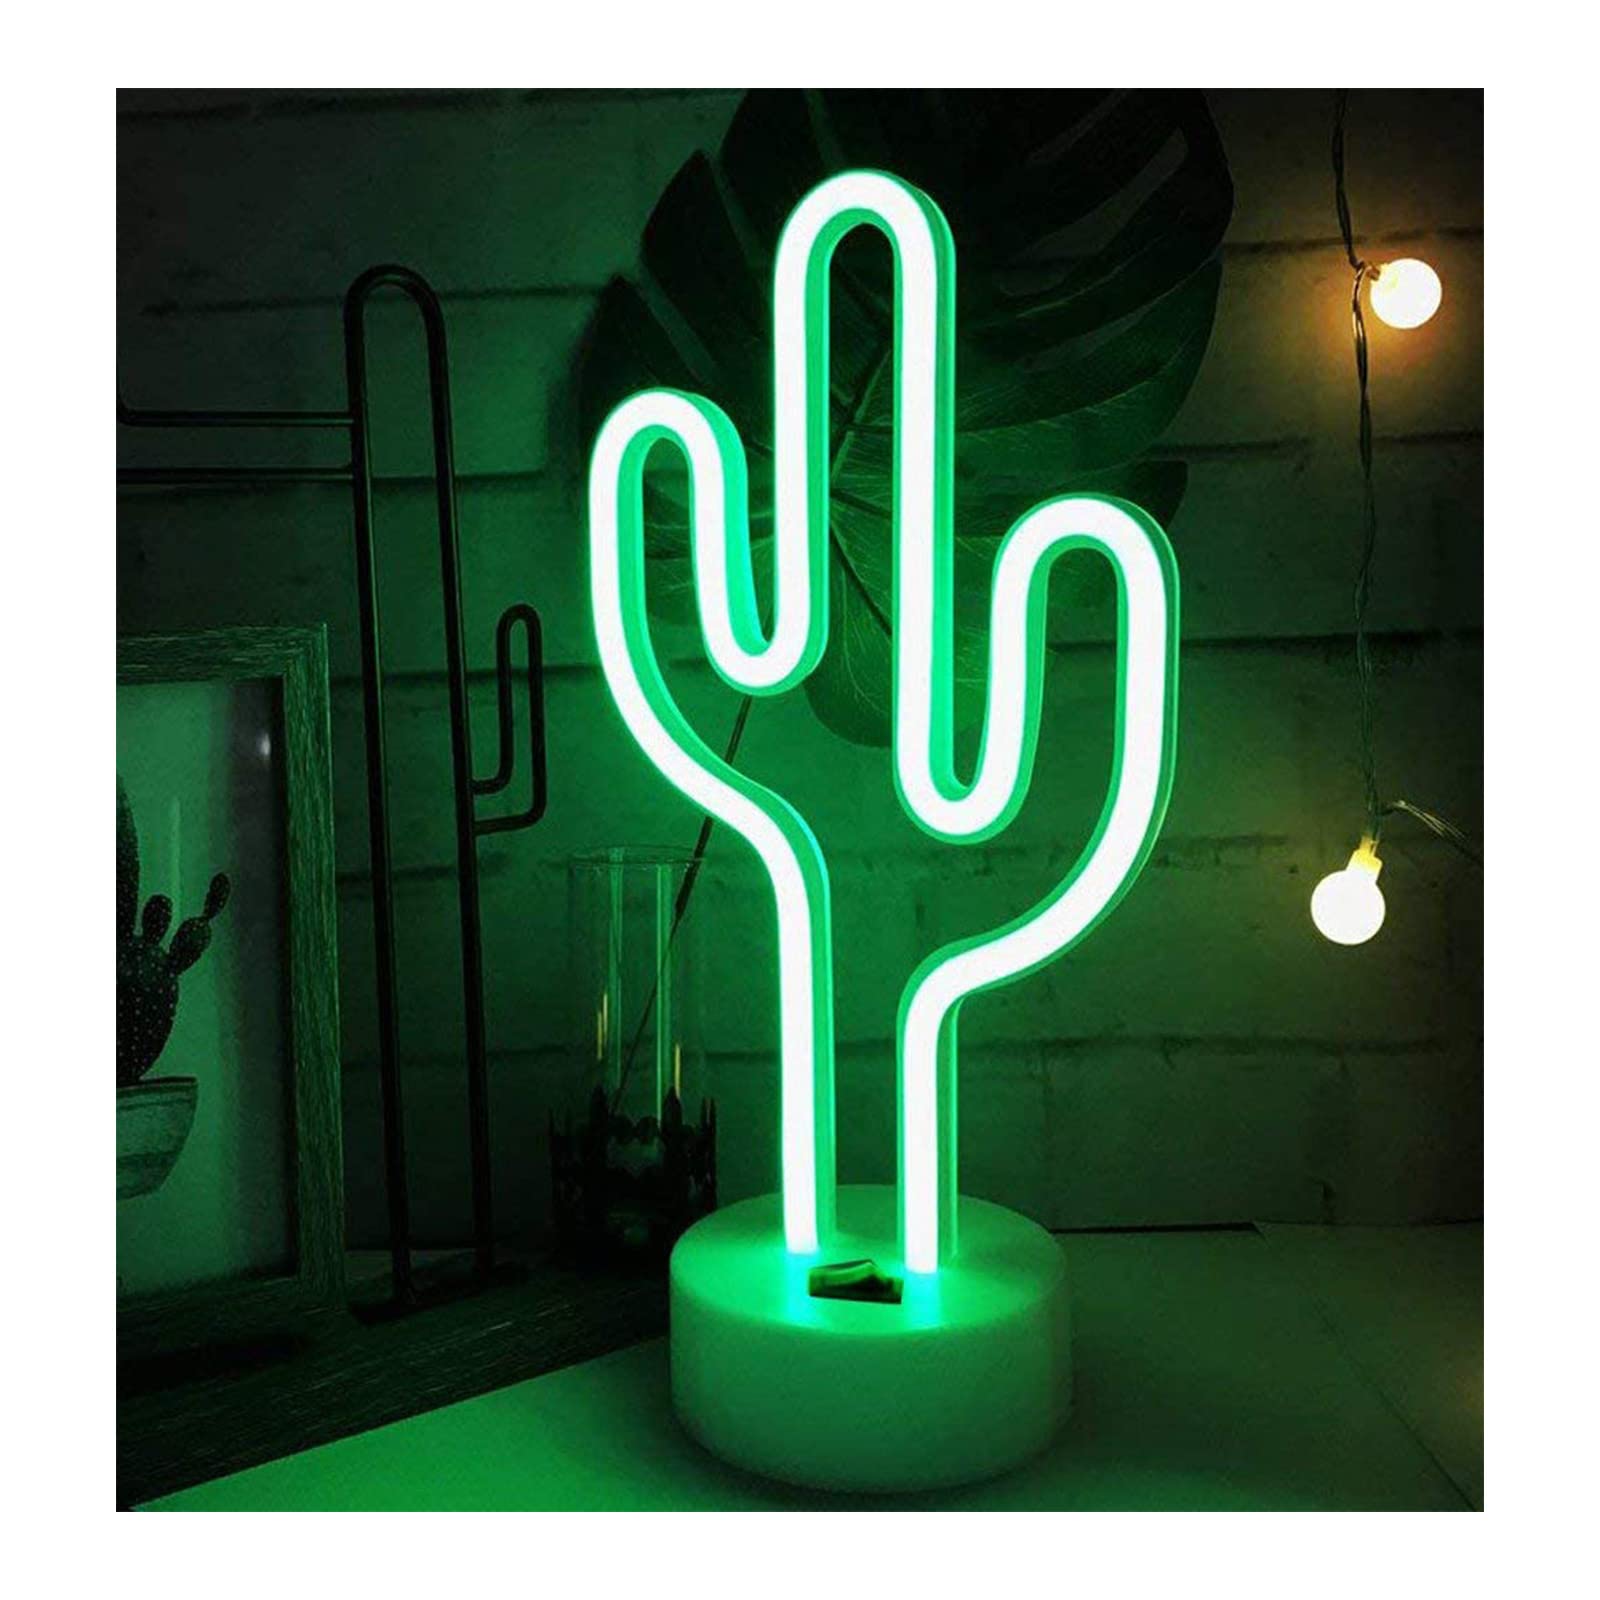 ENUOLI Cactus Lights Neon Signs LED Cactus Neon Lights Night Lights with Pedestal Room Decor Battery USB Operation Cactus Lamps Neon Signs Light Up Children's Room Bedroom Wedding Party Christmas